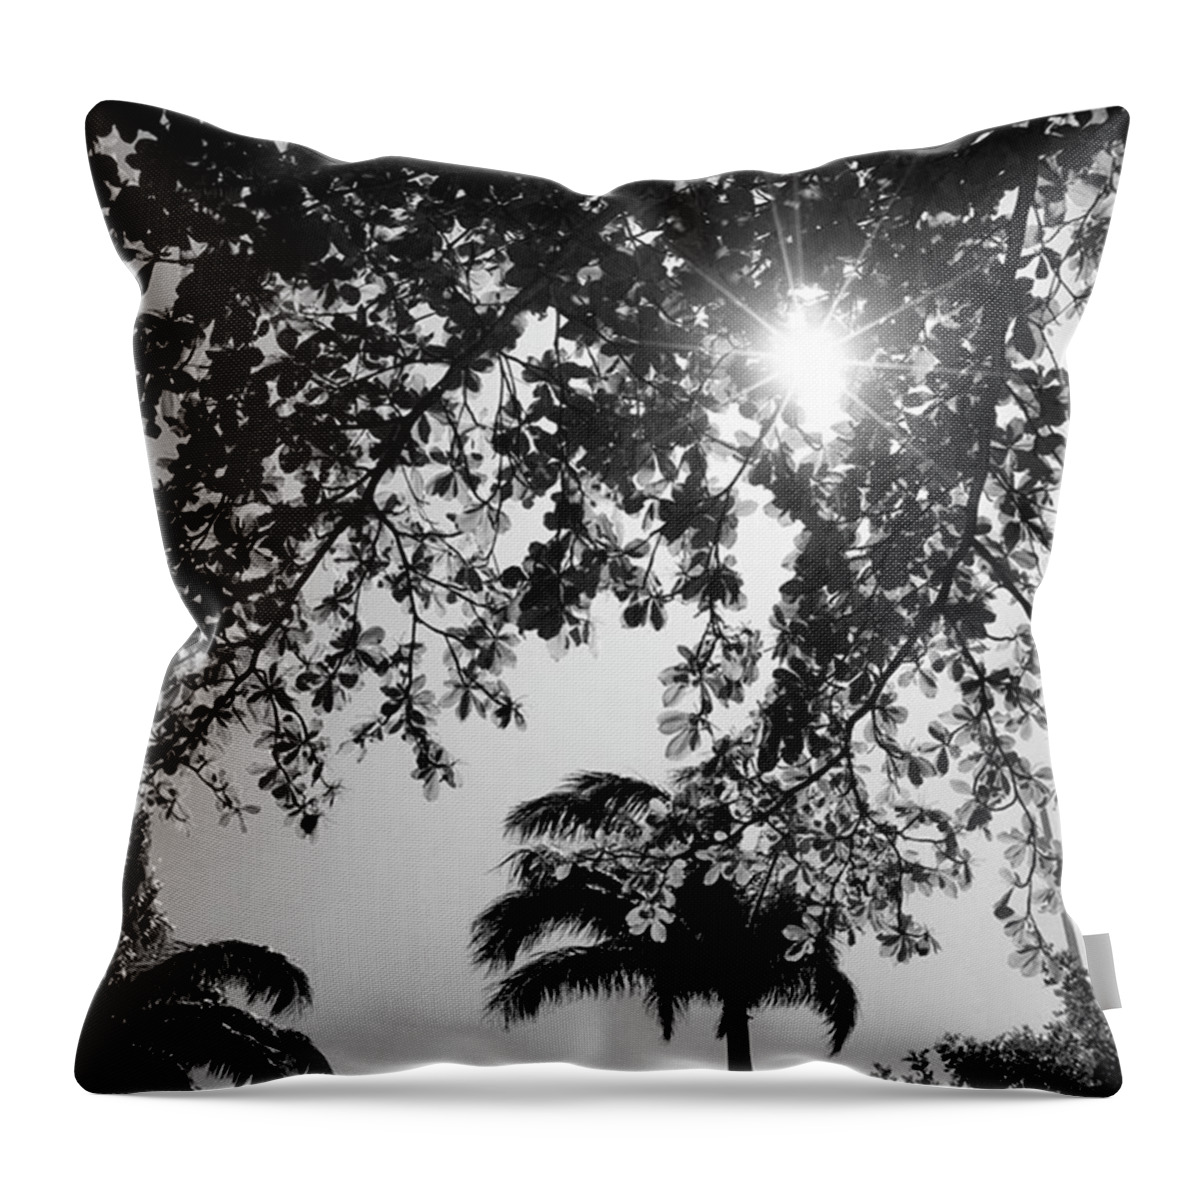  Throw Pillow featuring the photograph Sunshine In Australia by Aleck Cartwright